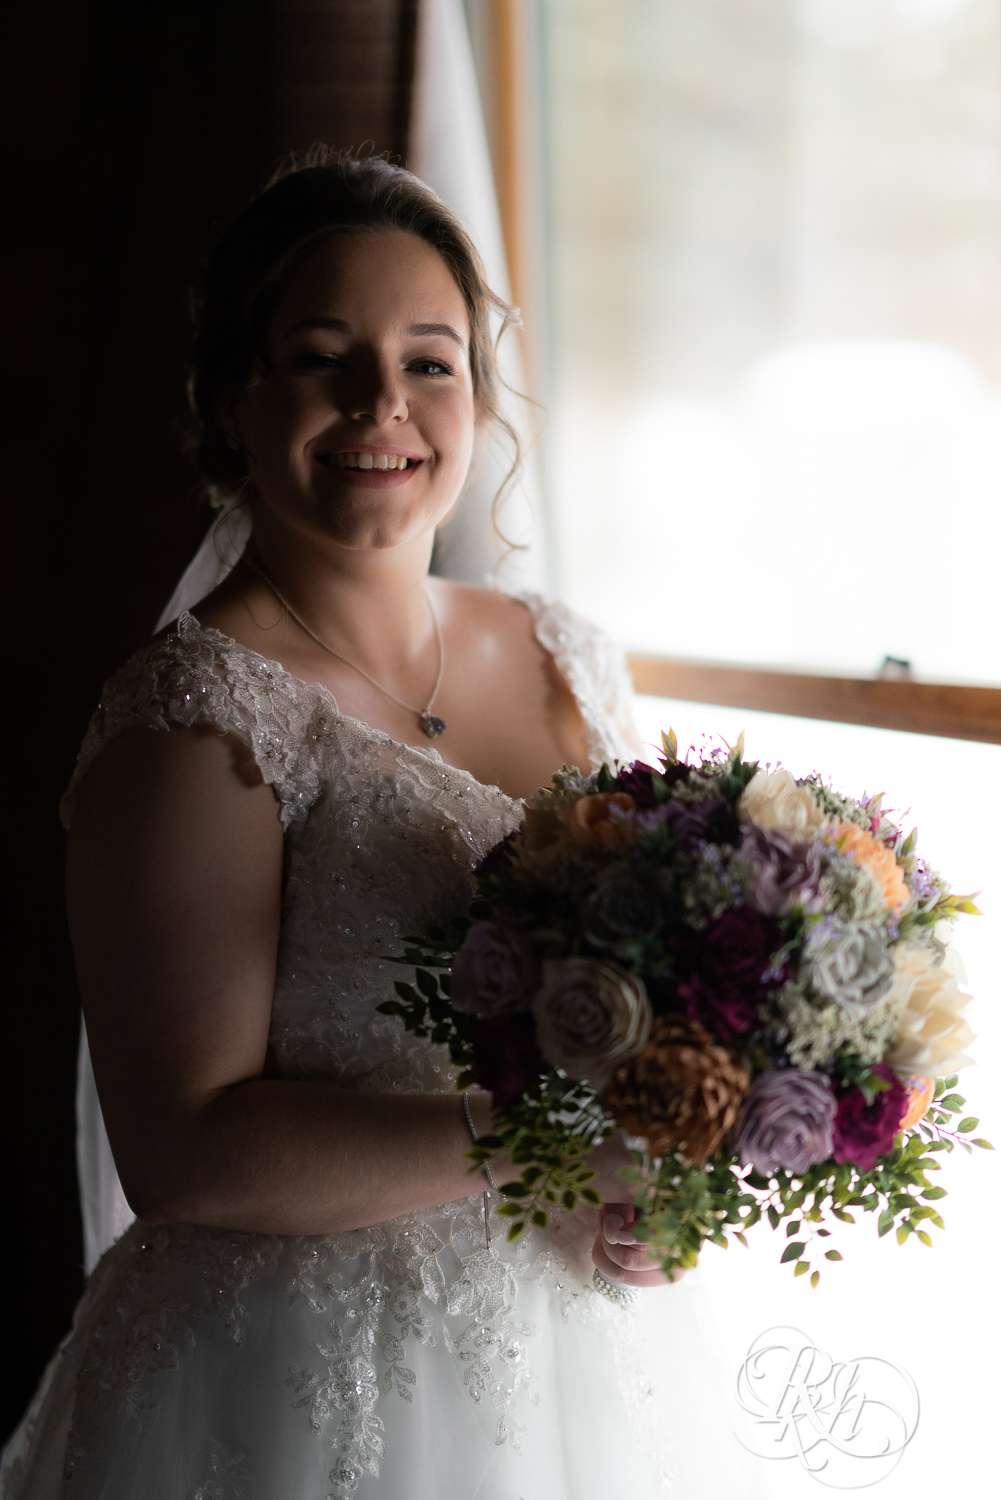 Bride smiling and holding flowers at Glenhaven Events in Farmington, Minnesota.